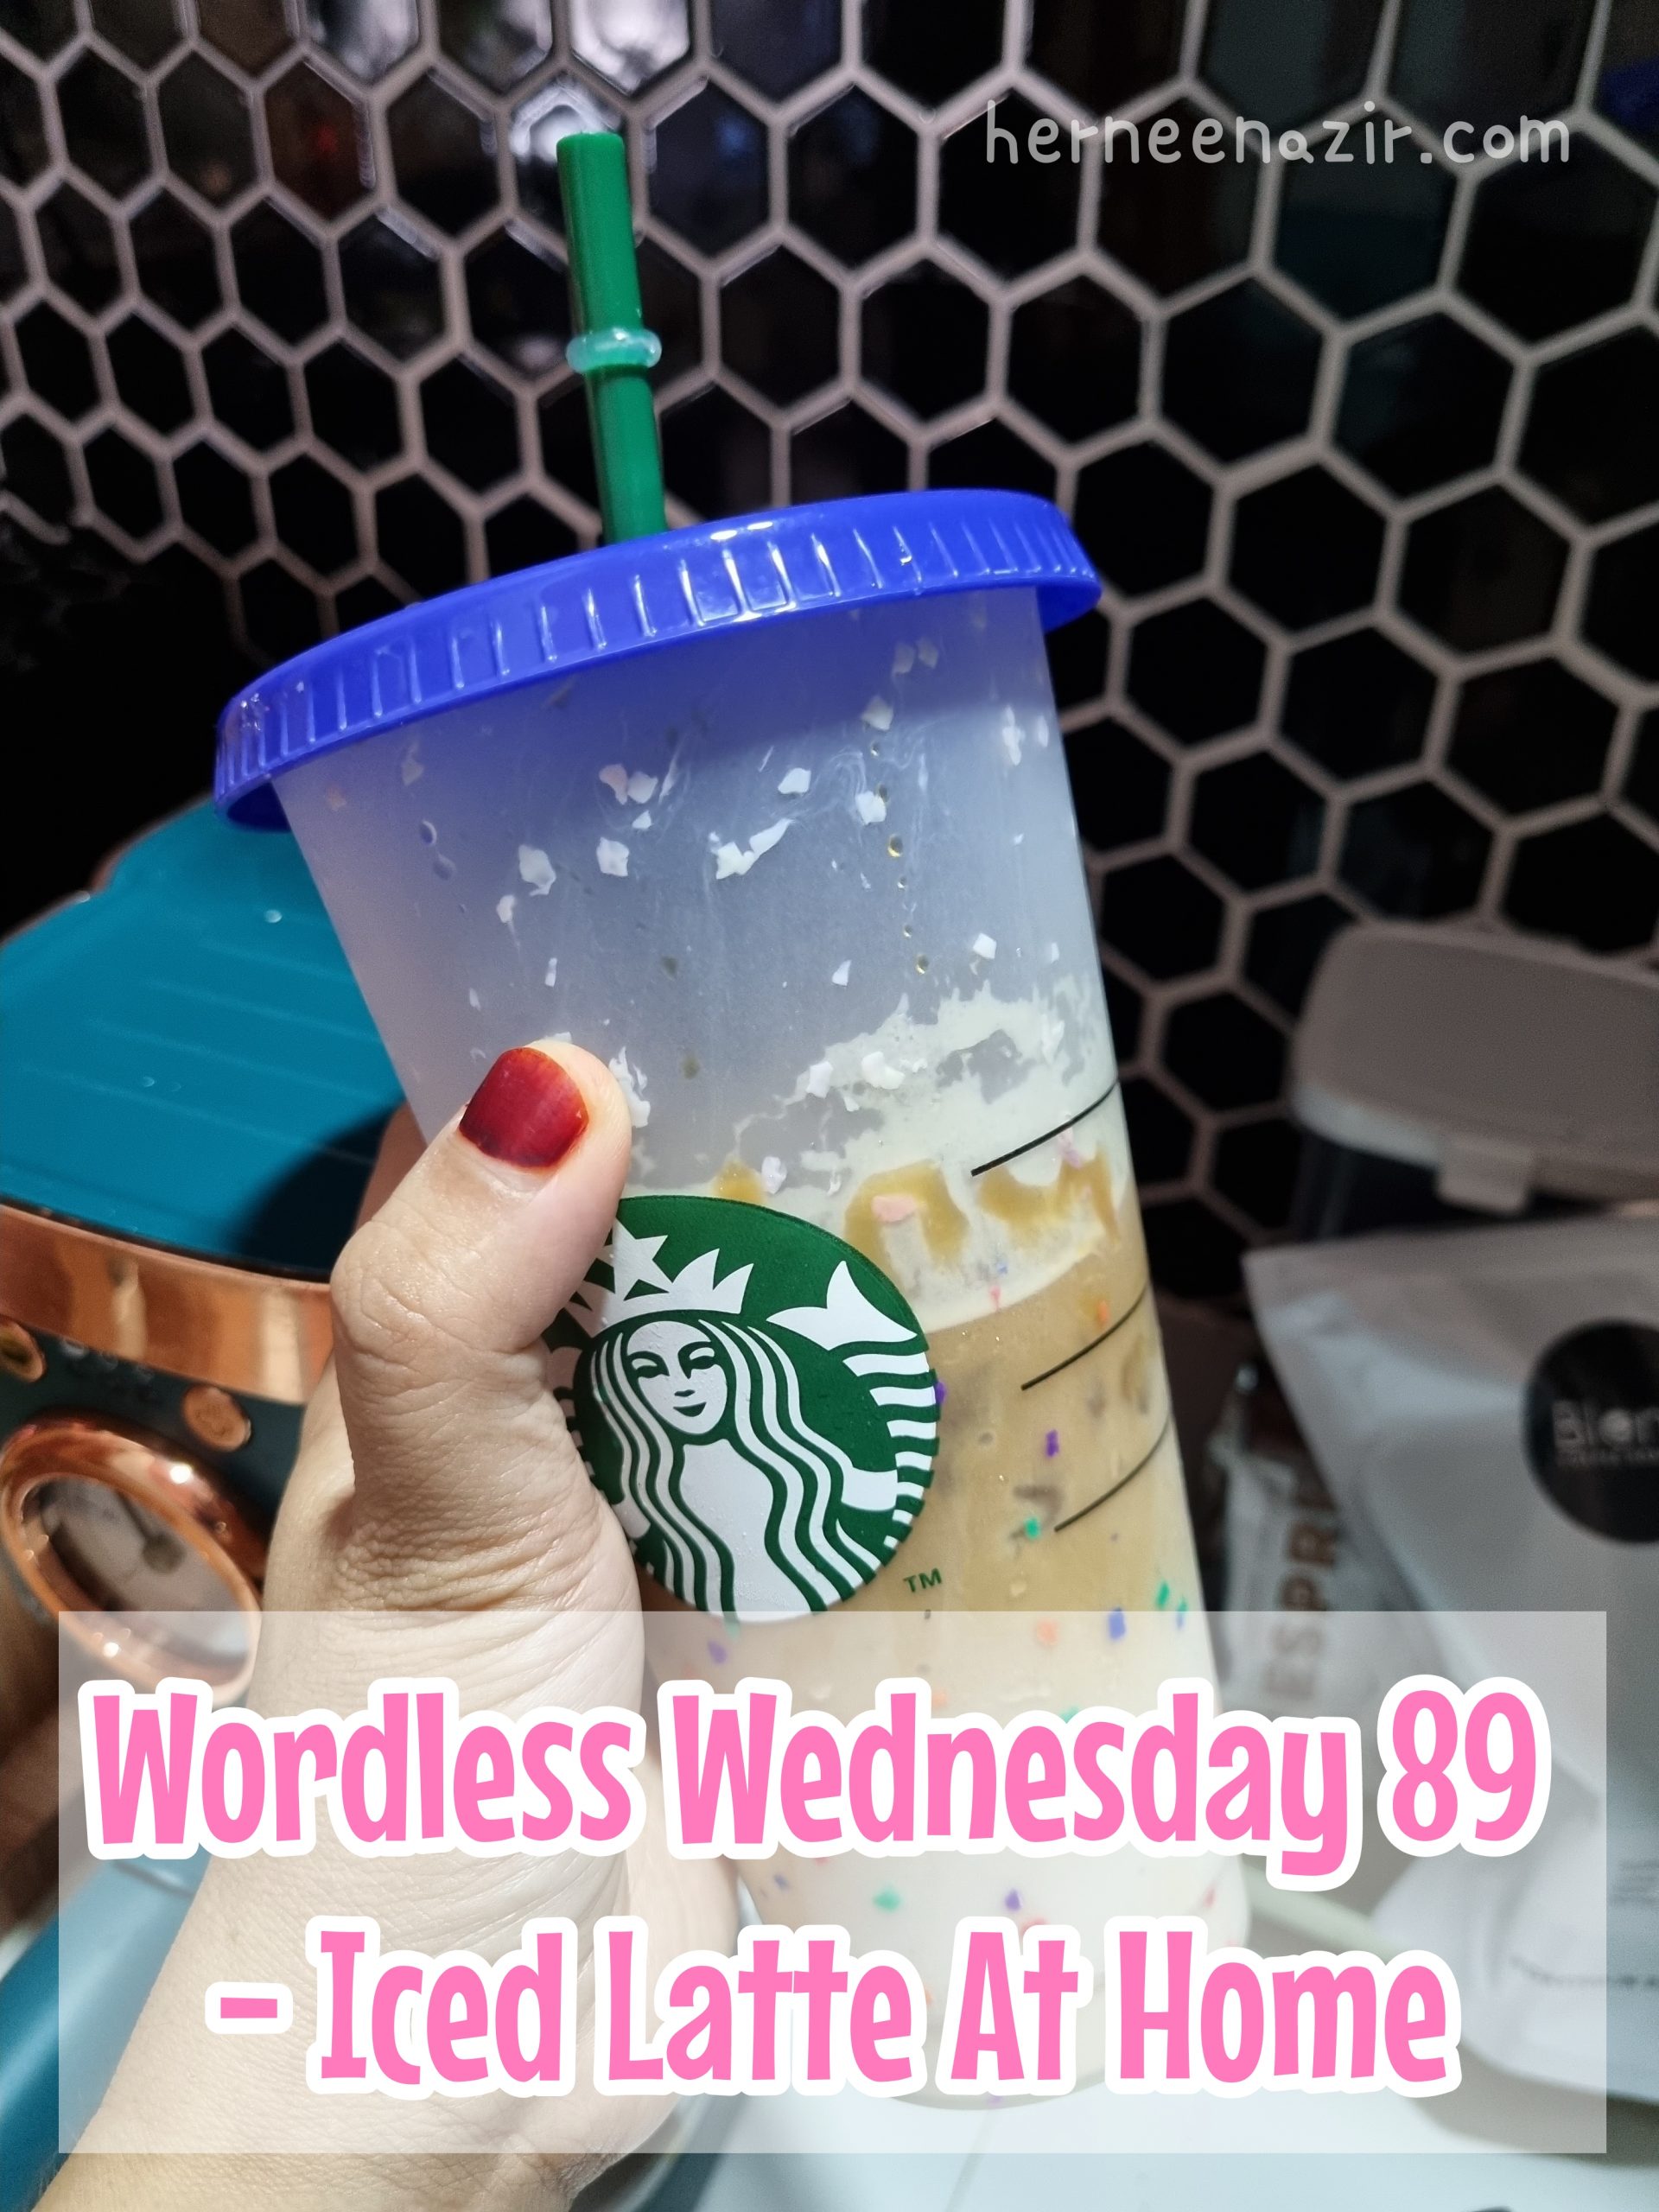 Wordless Wednesday 89 – Iced Latte At Home